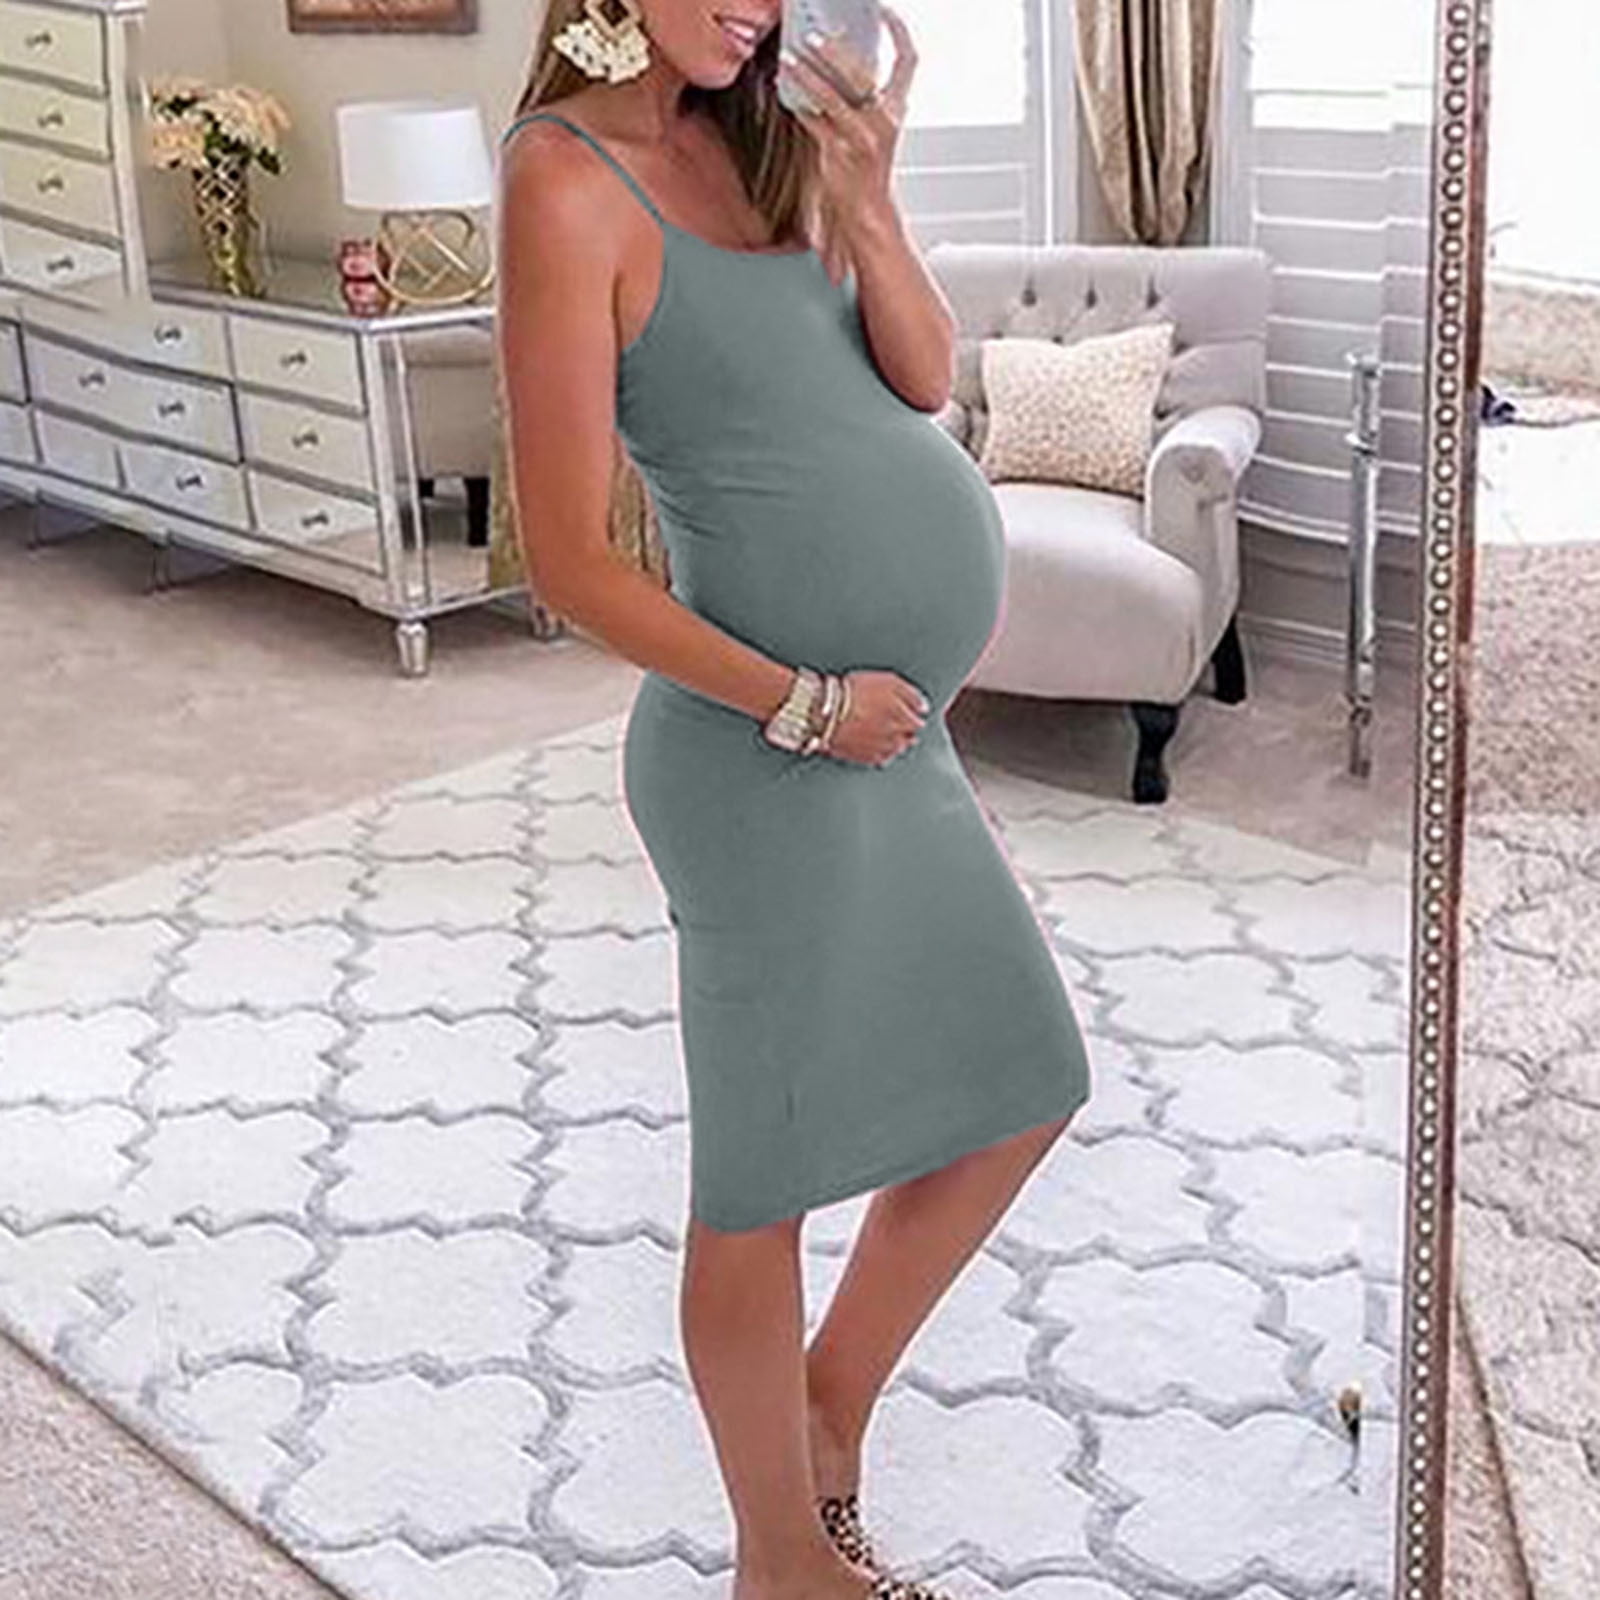 Summer Savings Clearance Edvintorg Maternity Clothes Women Summer Sexy